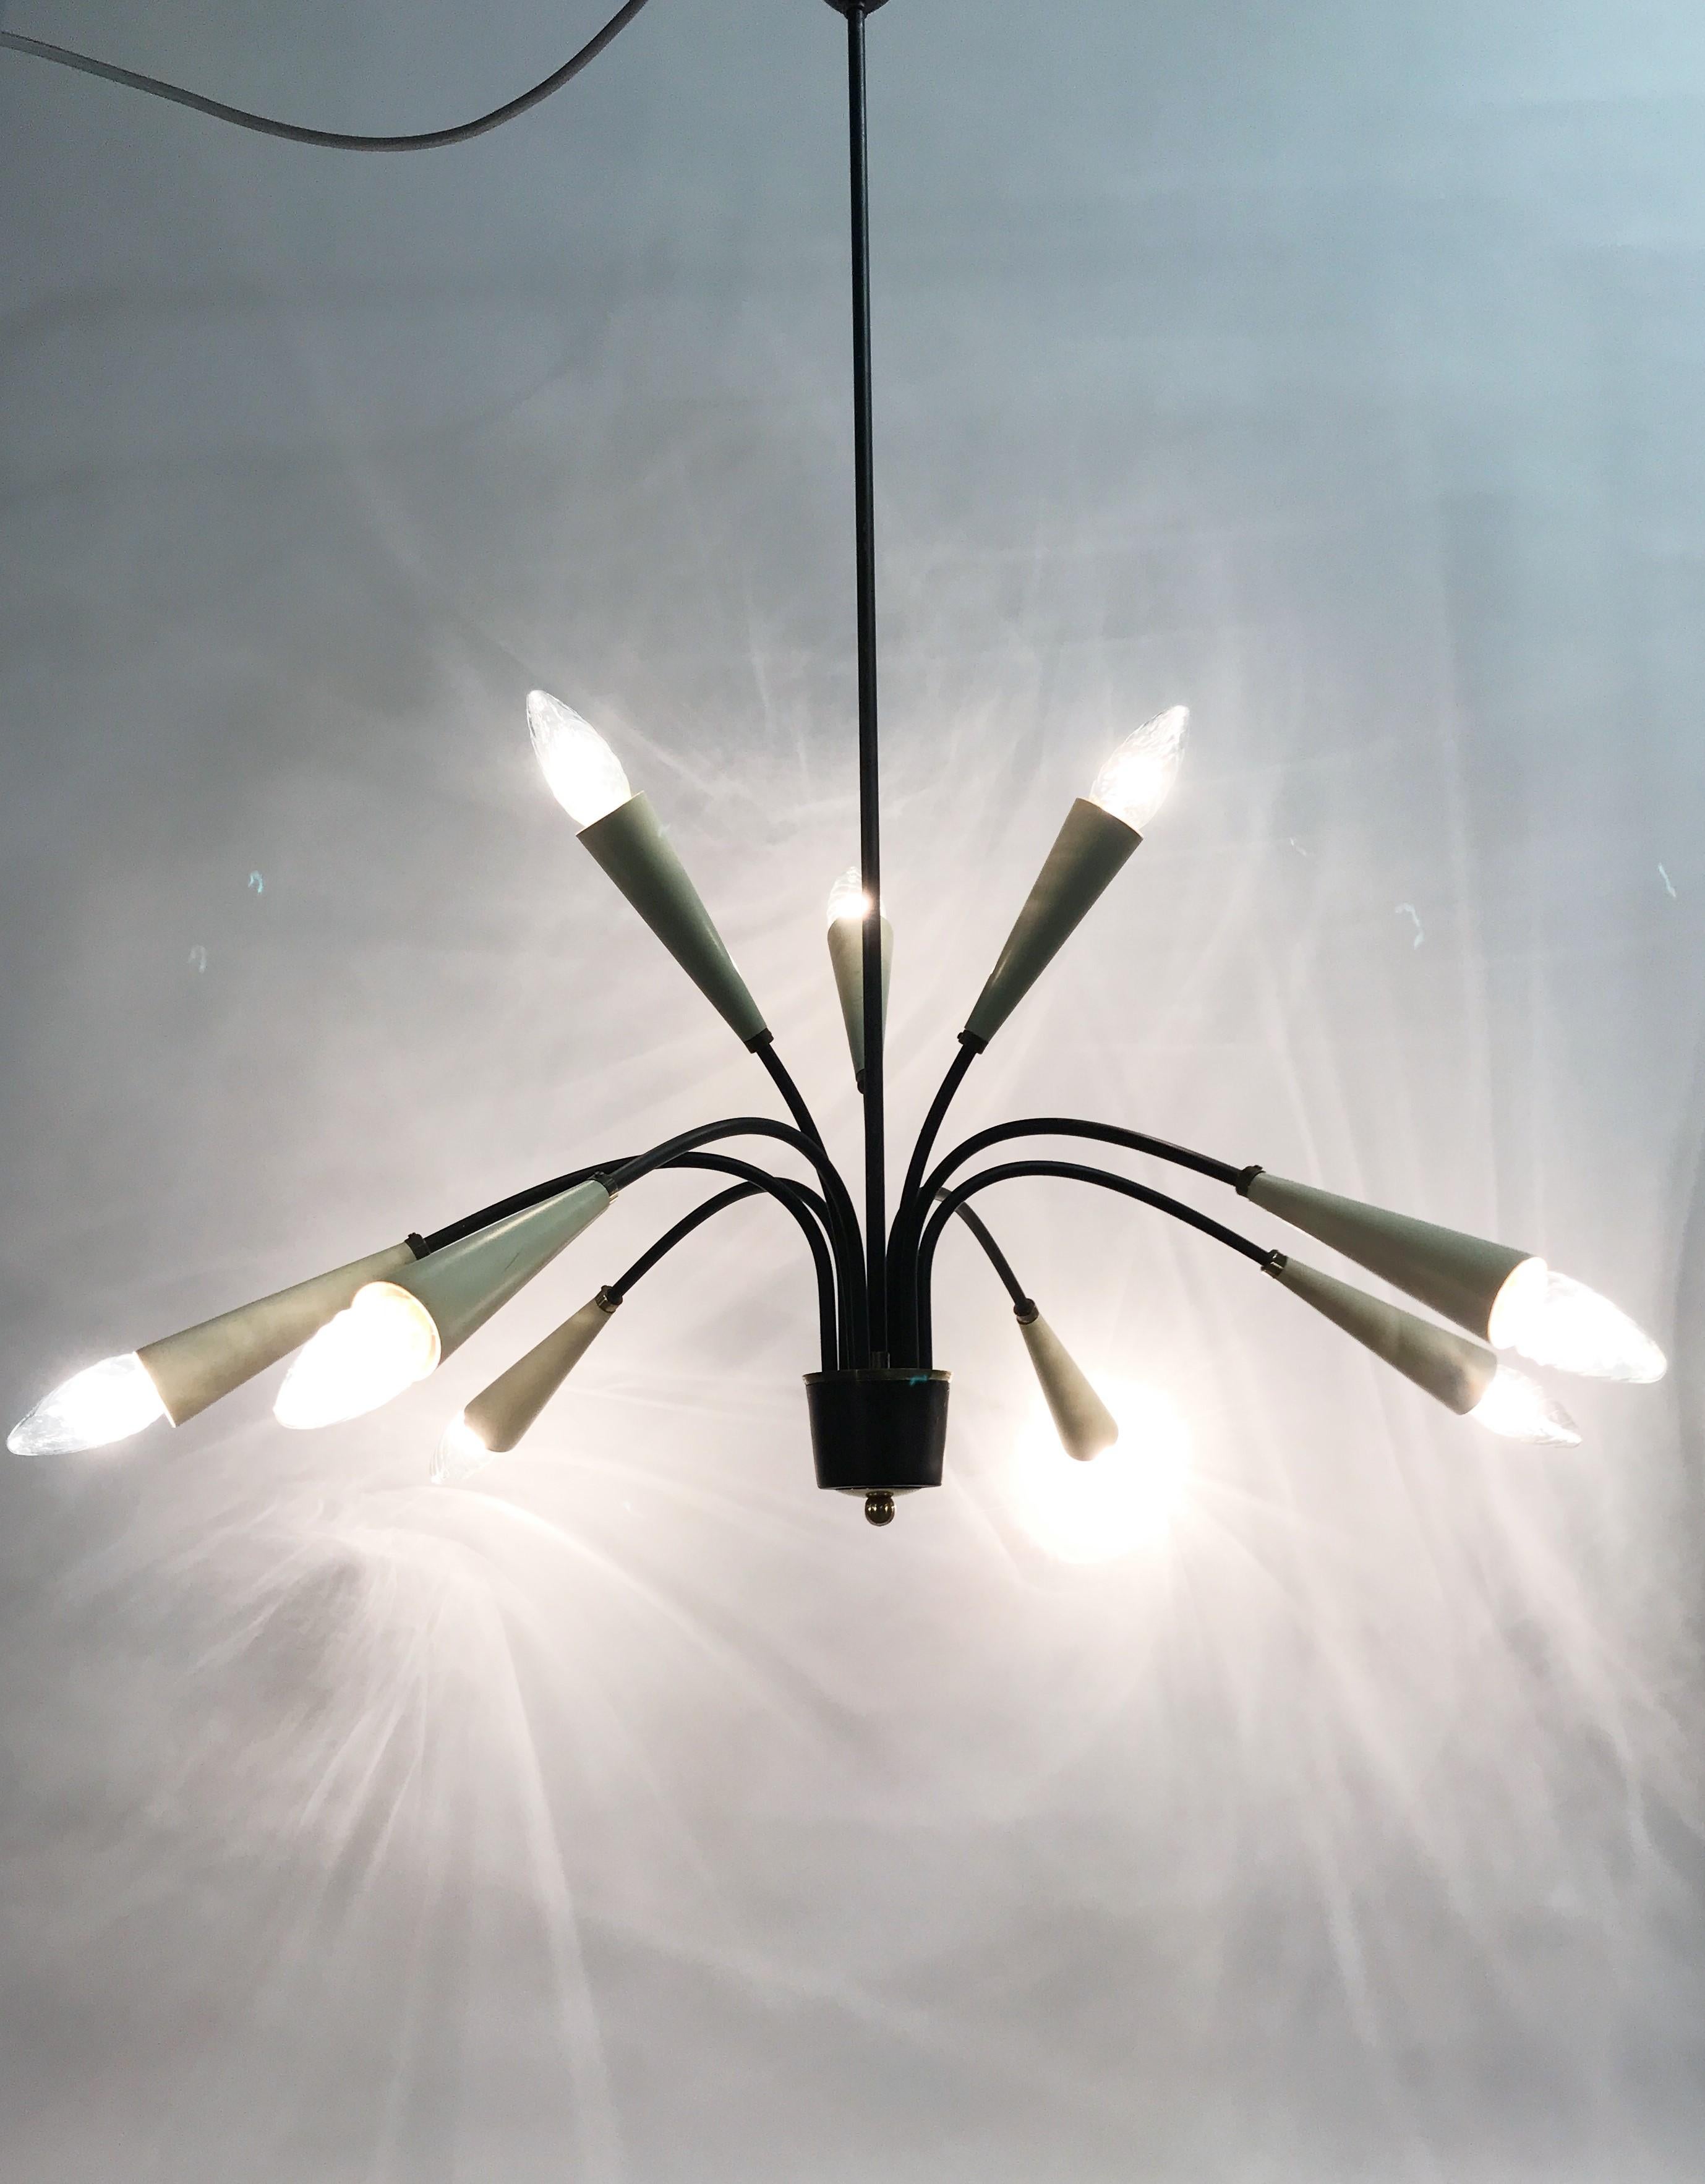 Original midcentury 9 lightpoint spider chandelier.The light fixture has 3 uplighter lightpoints as well.This style is sometimes referred to as rockabilly and was typical for the 1950s and 1960s.Good conditionTested and ready to use with regular E14